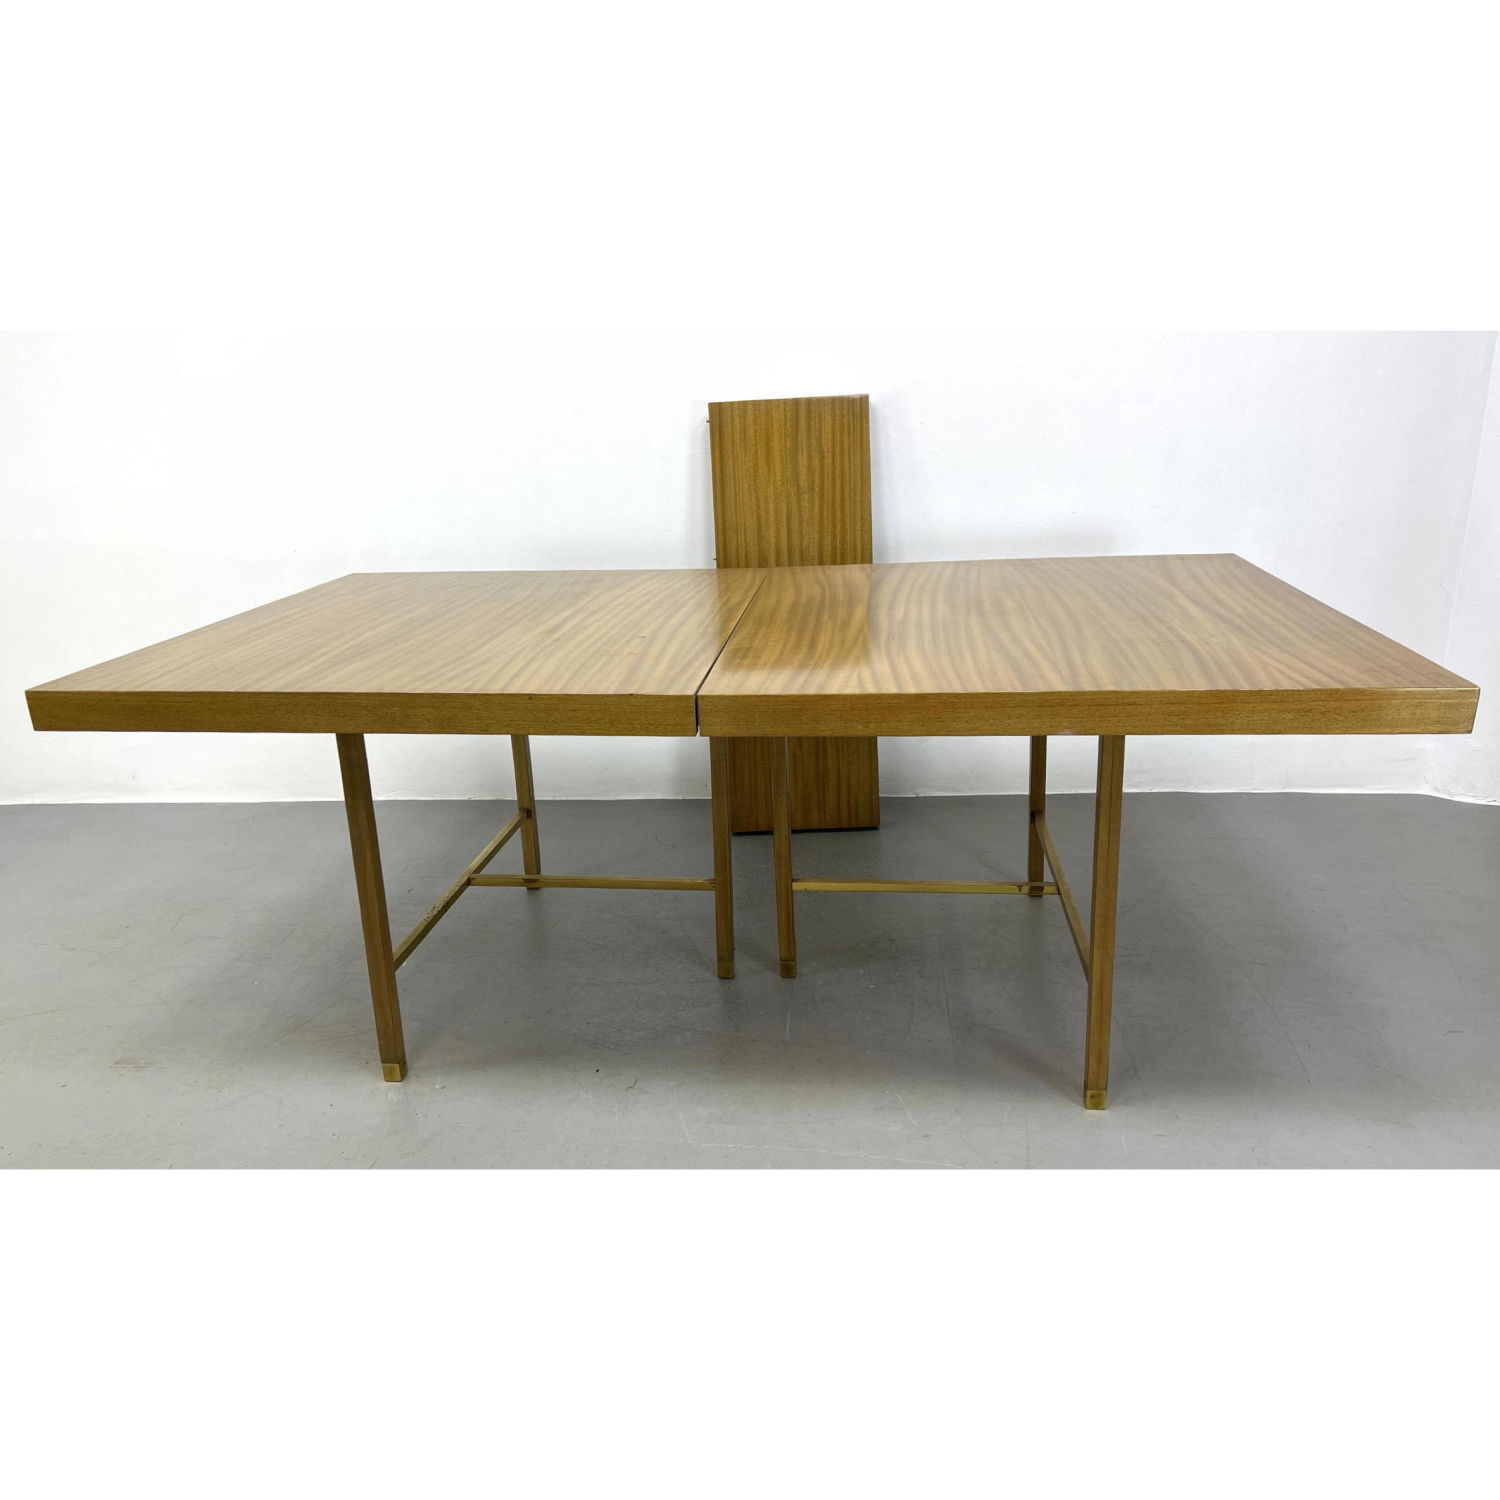 HARVEY PROBBER Dining Table. Wood